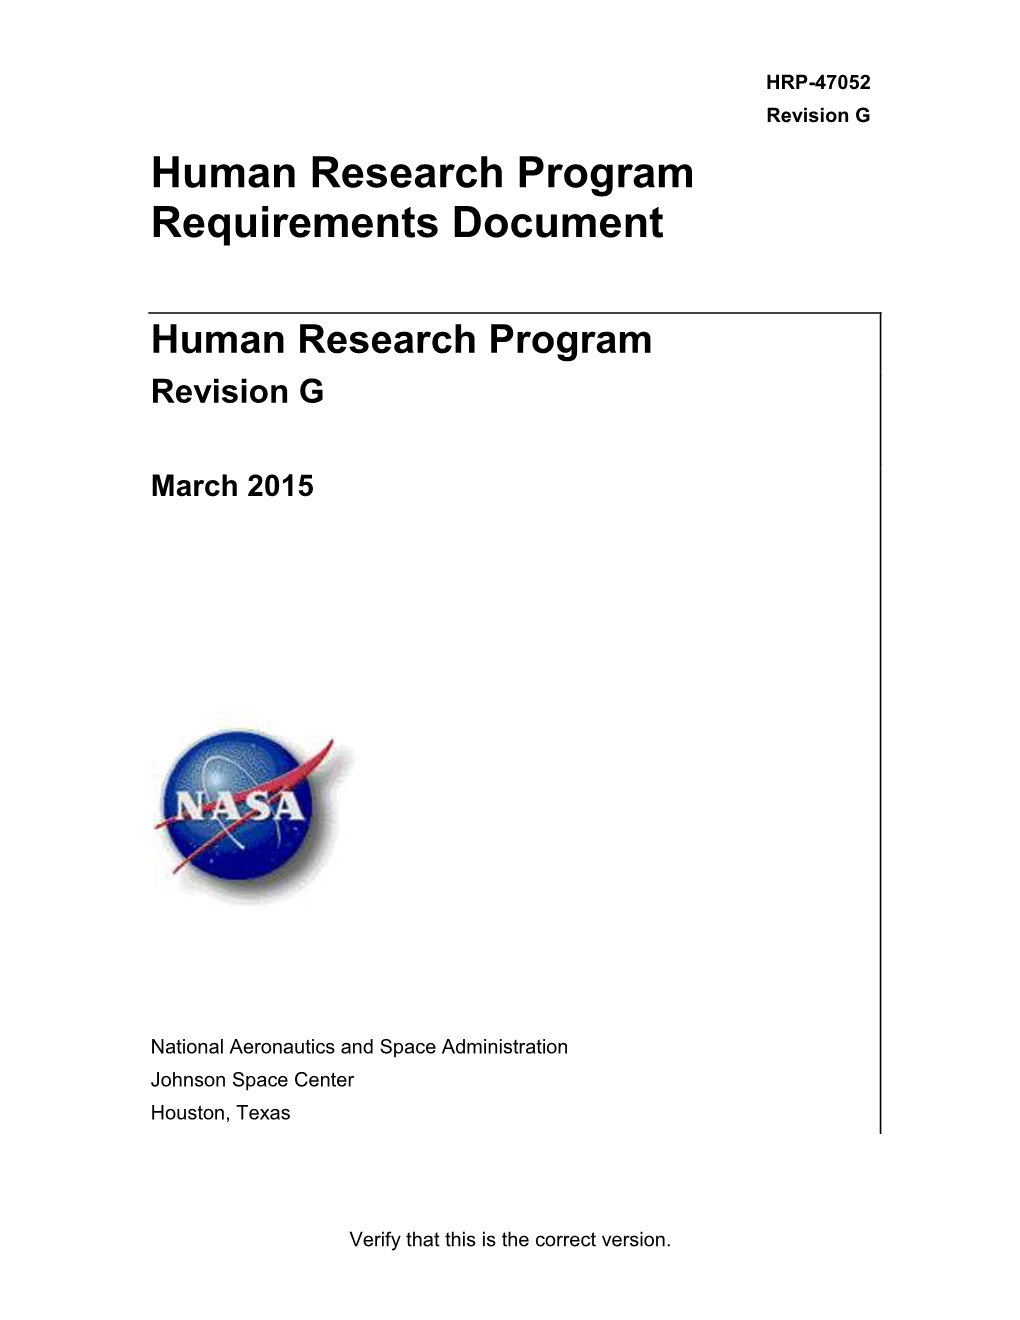 Human Research Program Requirements Document